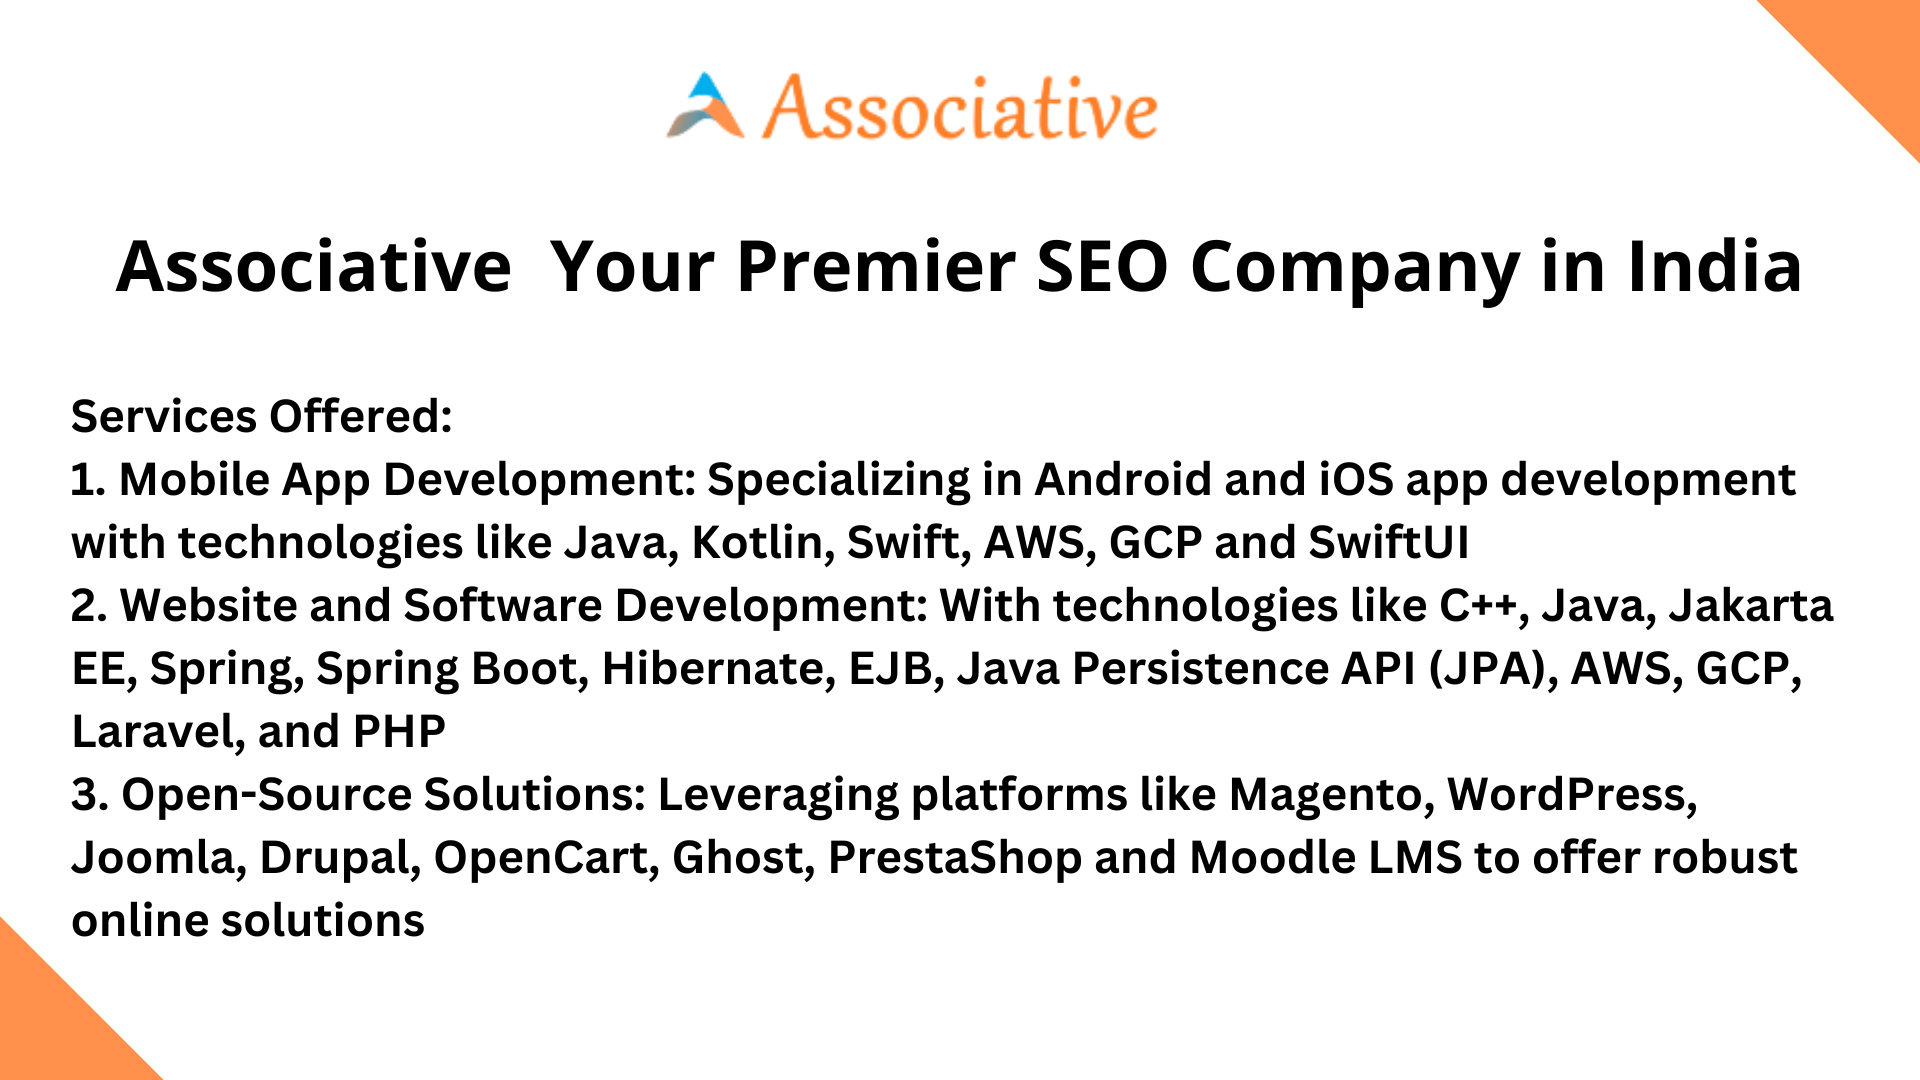 Associative-Your-Premier-SEO-Company-in-India